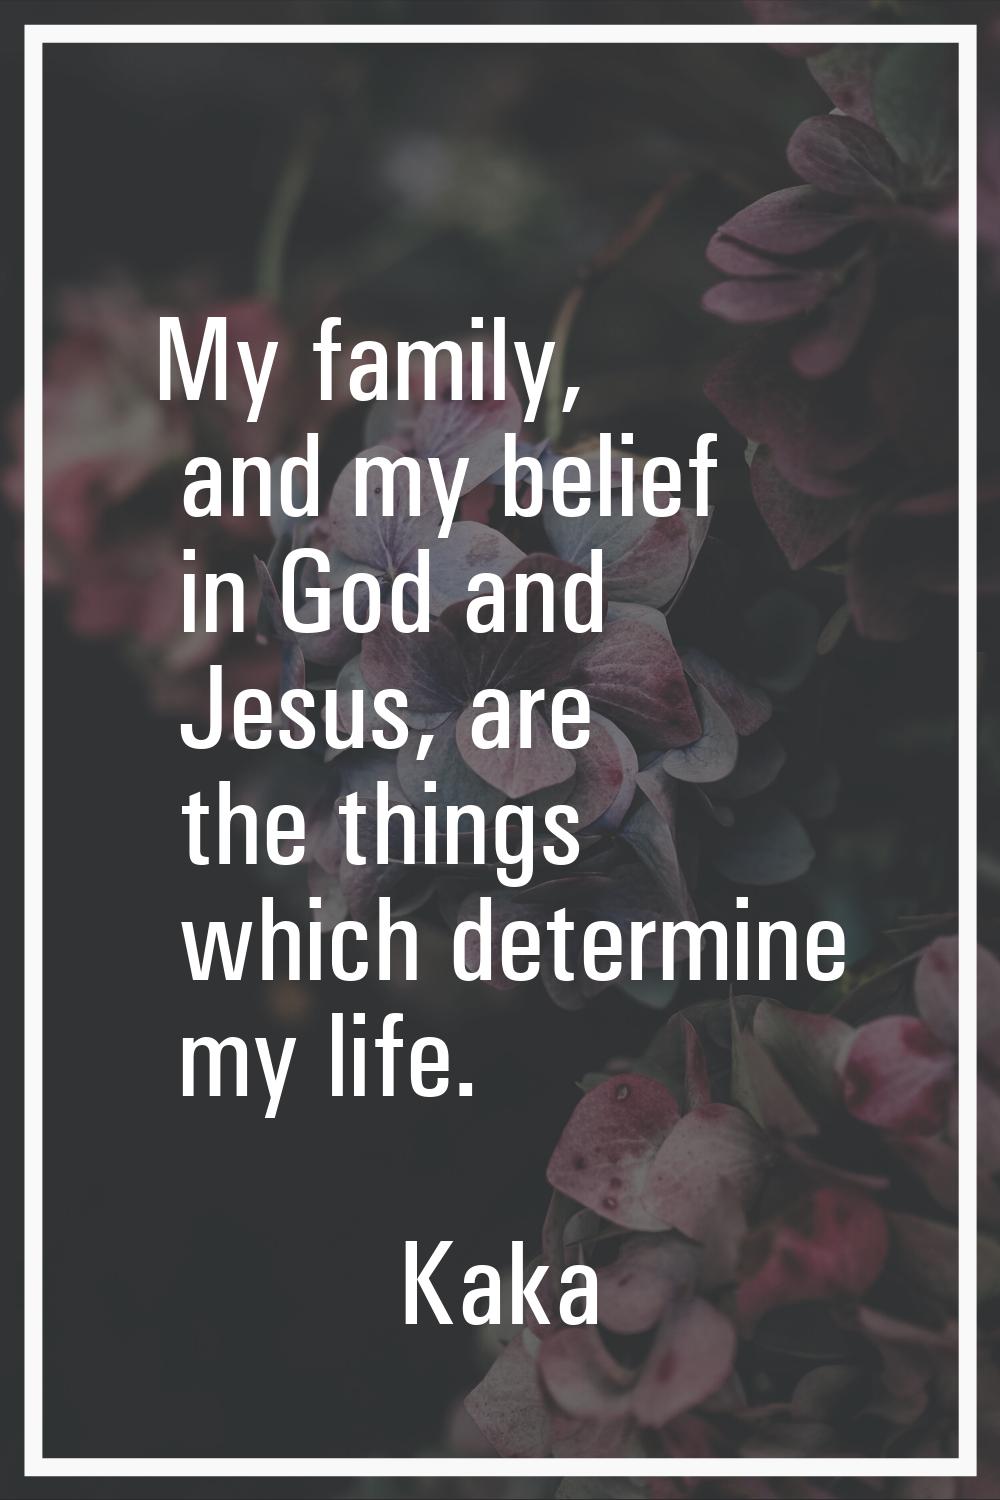 My family, and my belief in God and Jesus, are the things which determine my life.